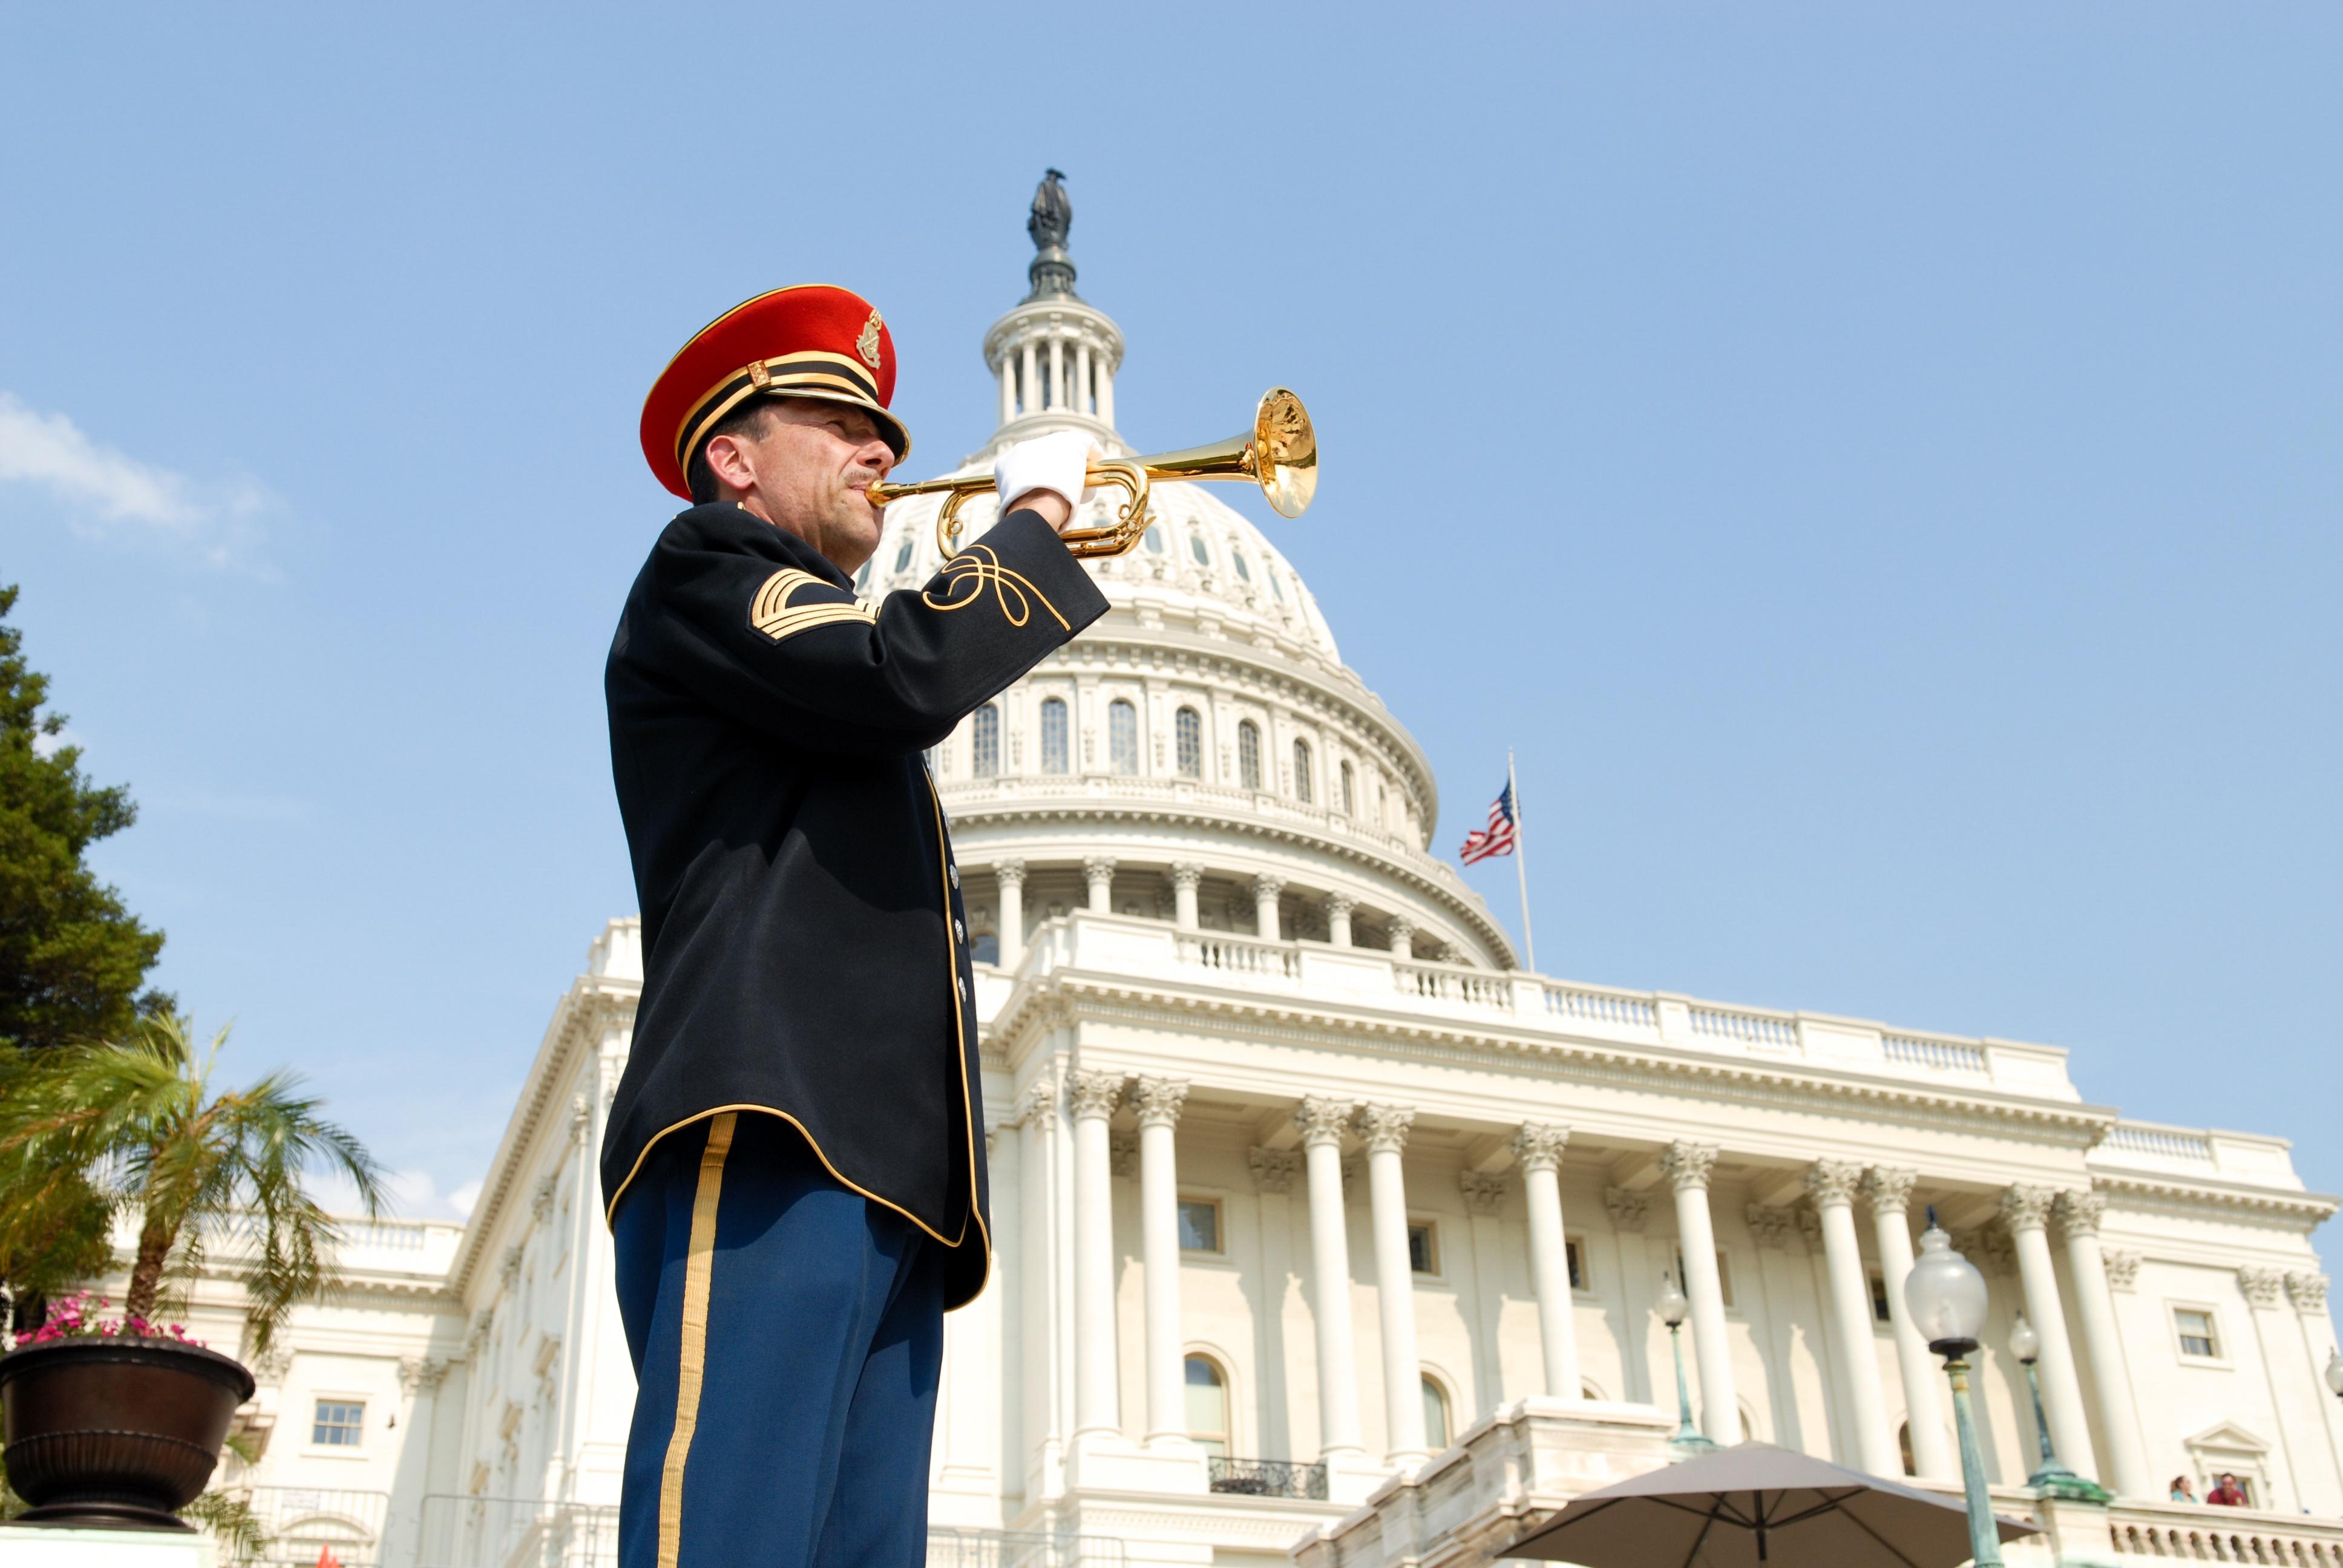 A soldier bugling in front of the U.S. Capitol Building.